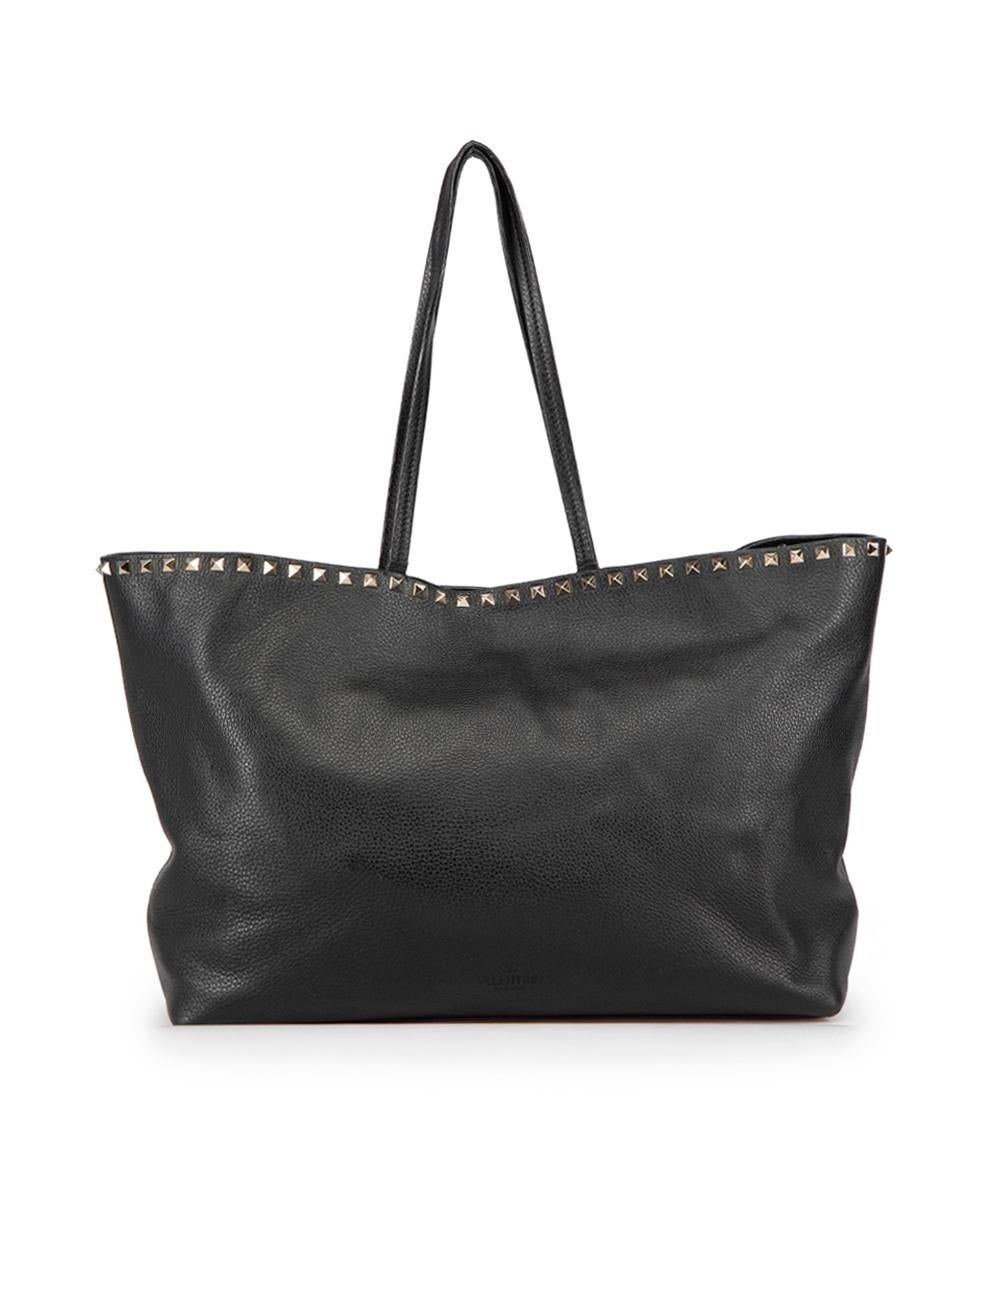 Valentino Black Leather Rockstud Tote Bag In Good Condition In London, GB